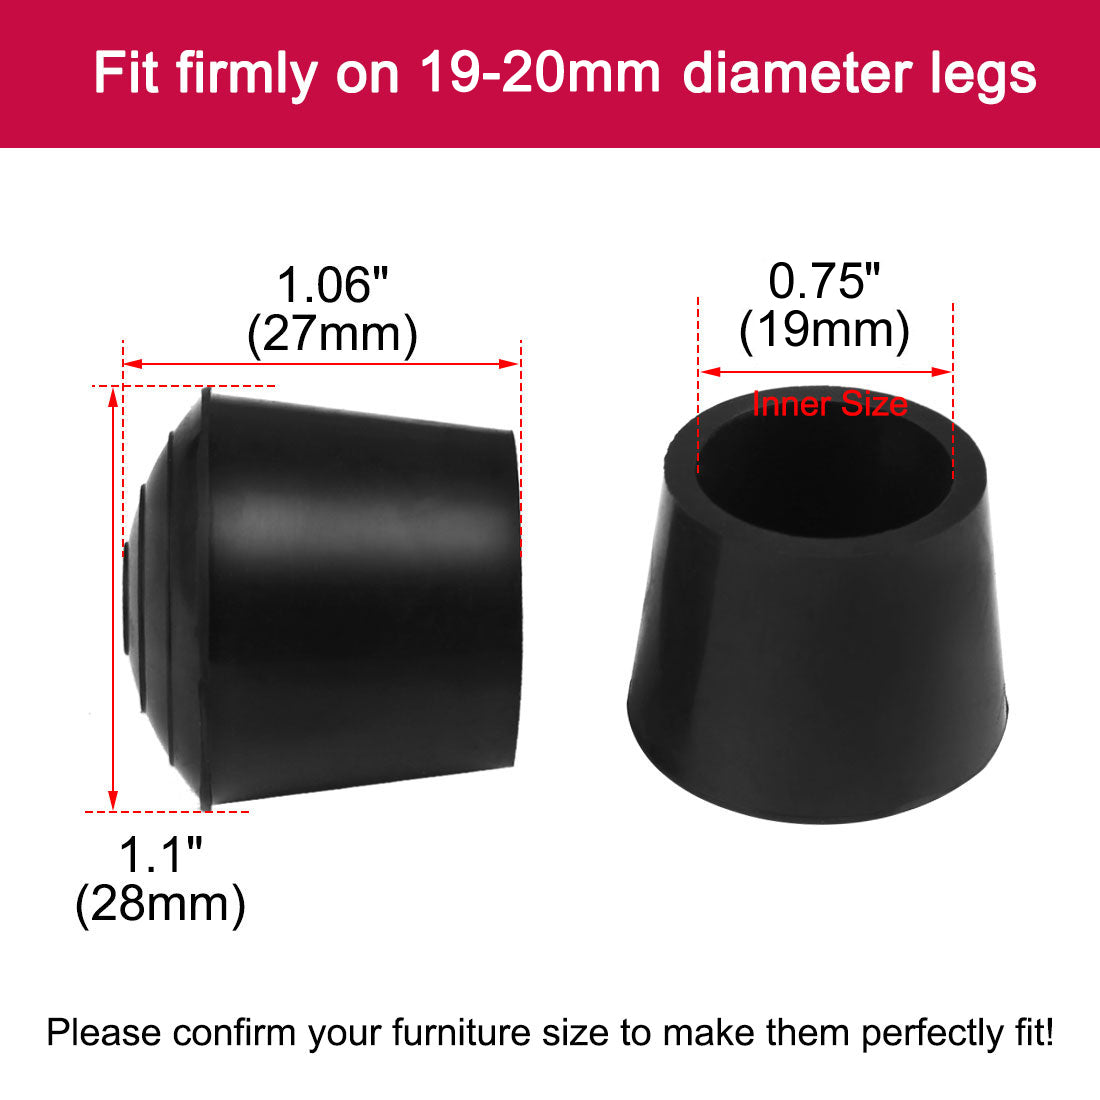 uxcell Uxcell Rubber Leg Cap Tip Cup Feet Cover 19mm 3/4" Inner Dia 32pcs for Furniture Chair